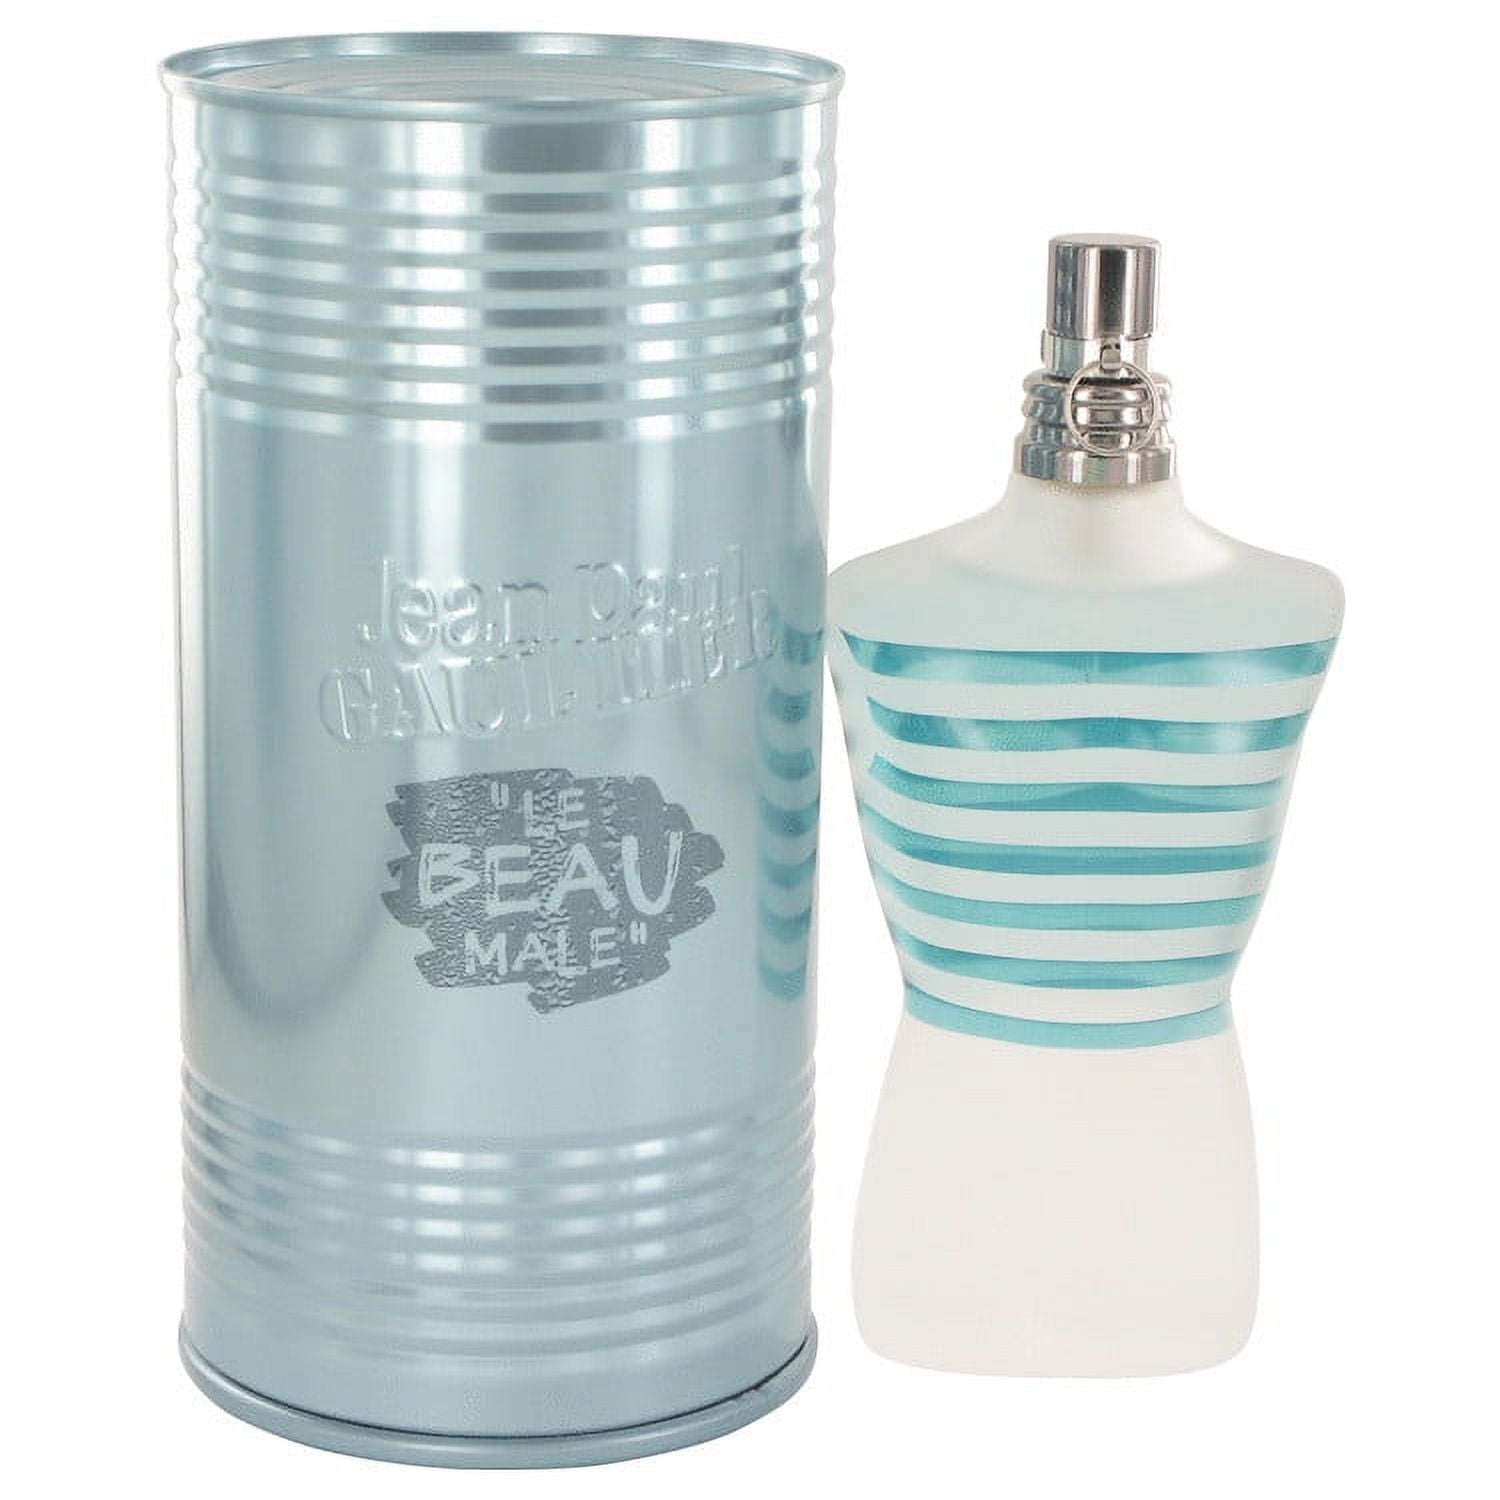 Le Male Summer 2013 Jean Paul Gaultier cologne - a fragrance for